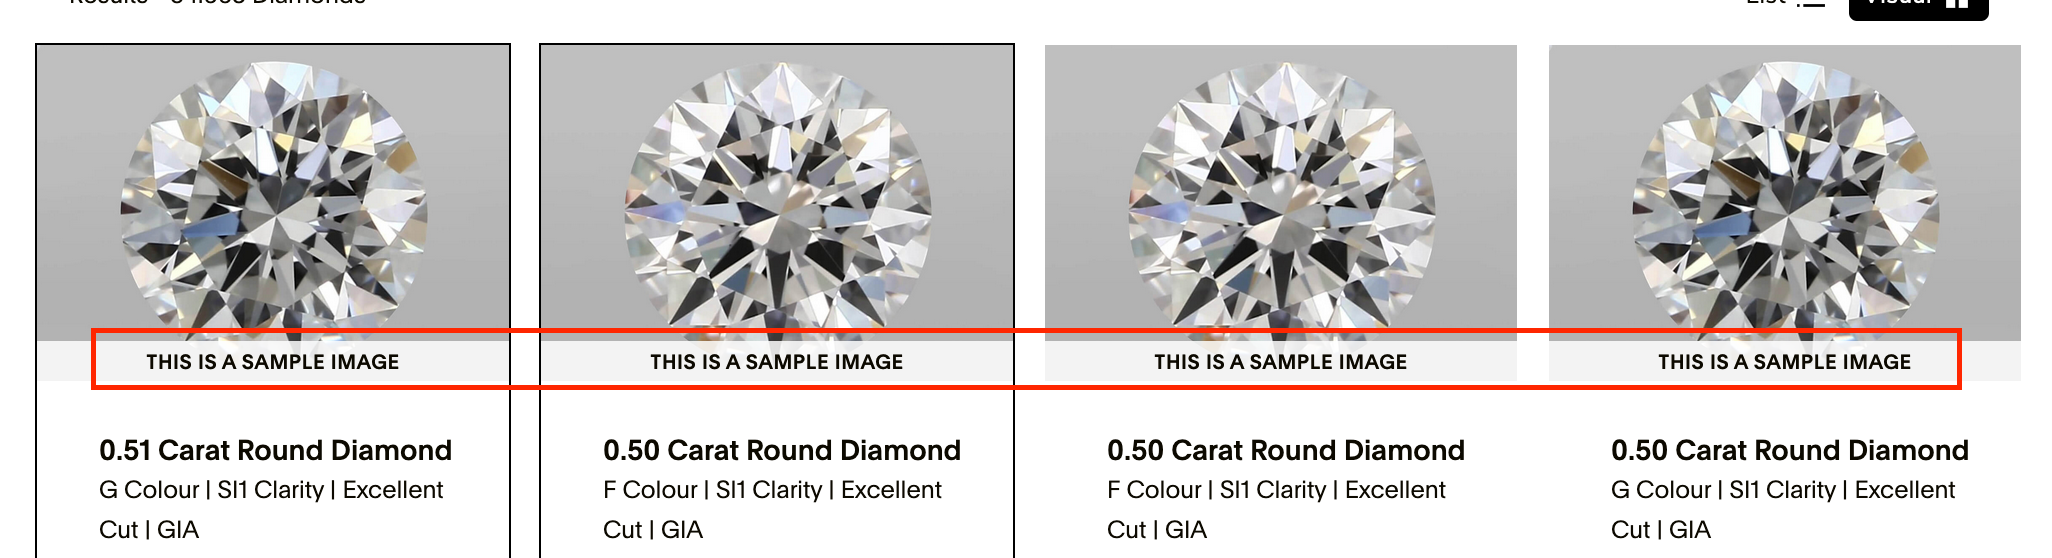 Online retailers mostly do not sell beautiful diamonds